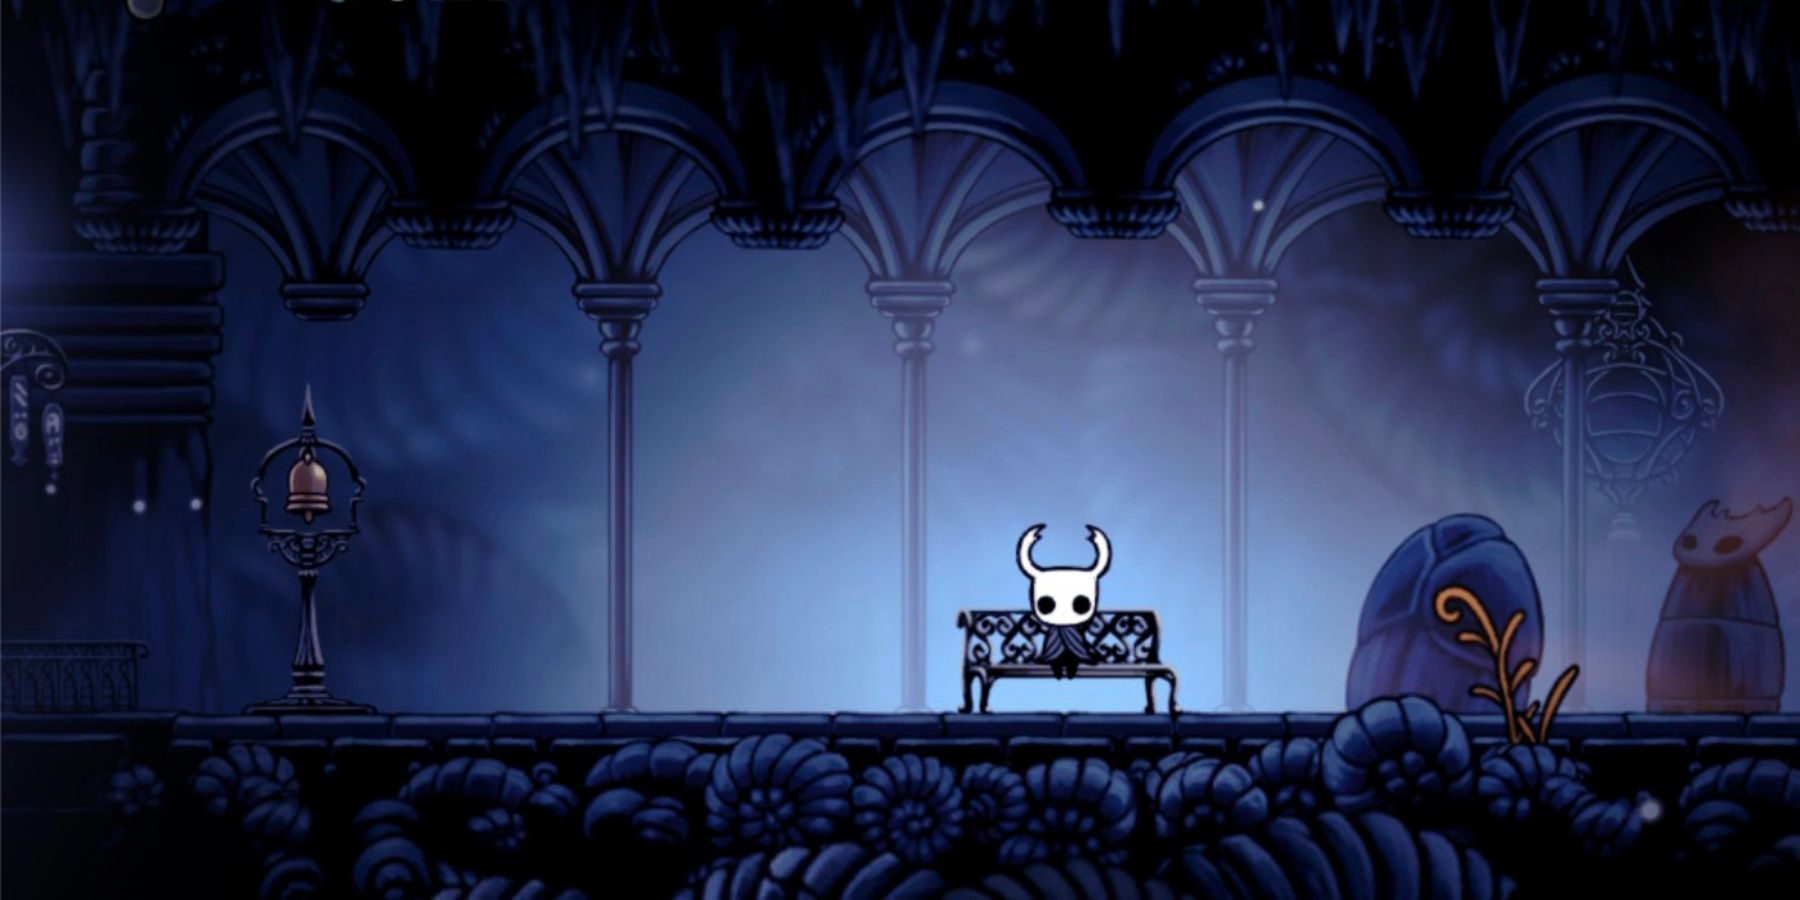 hollow knight stag stations map